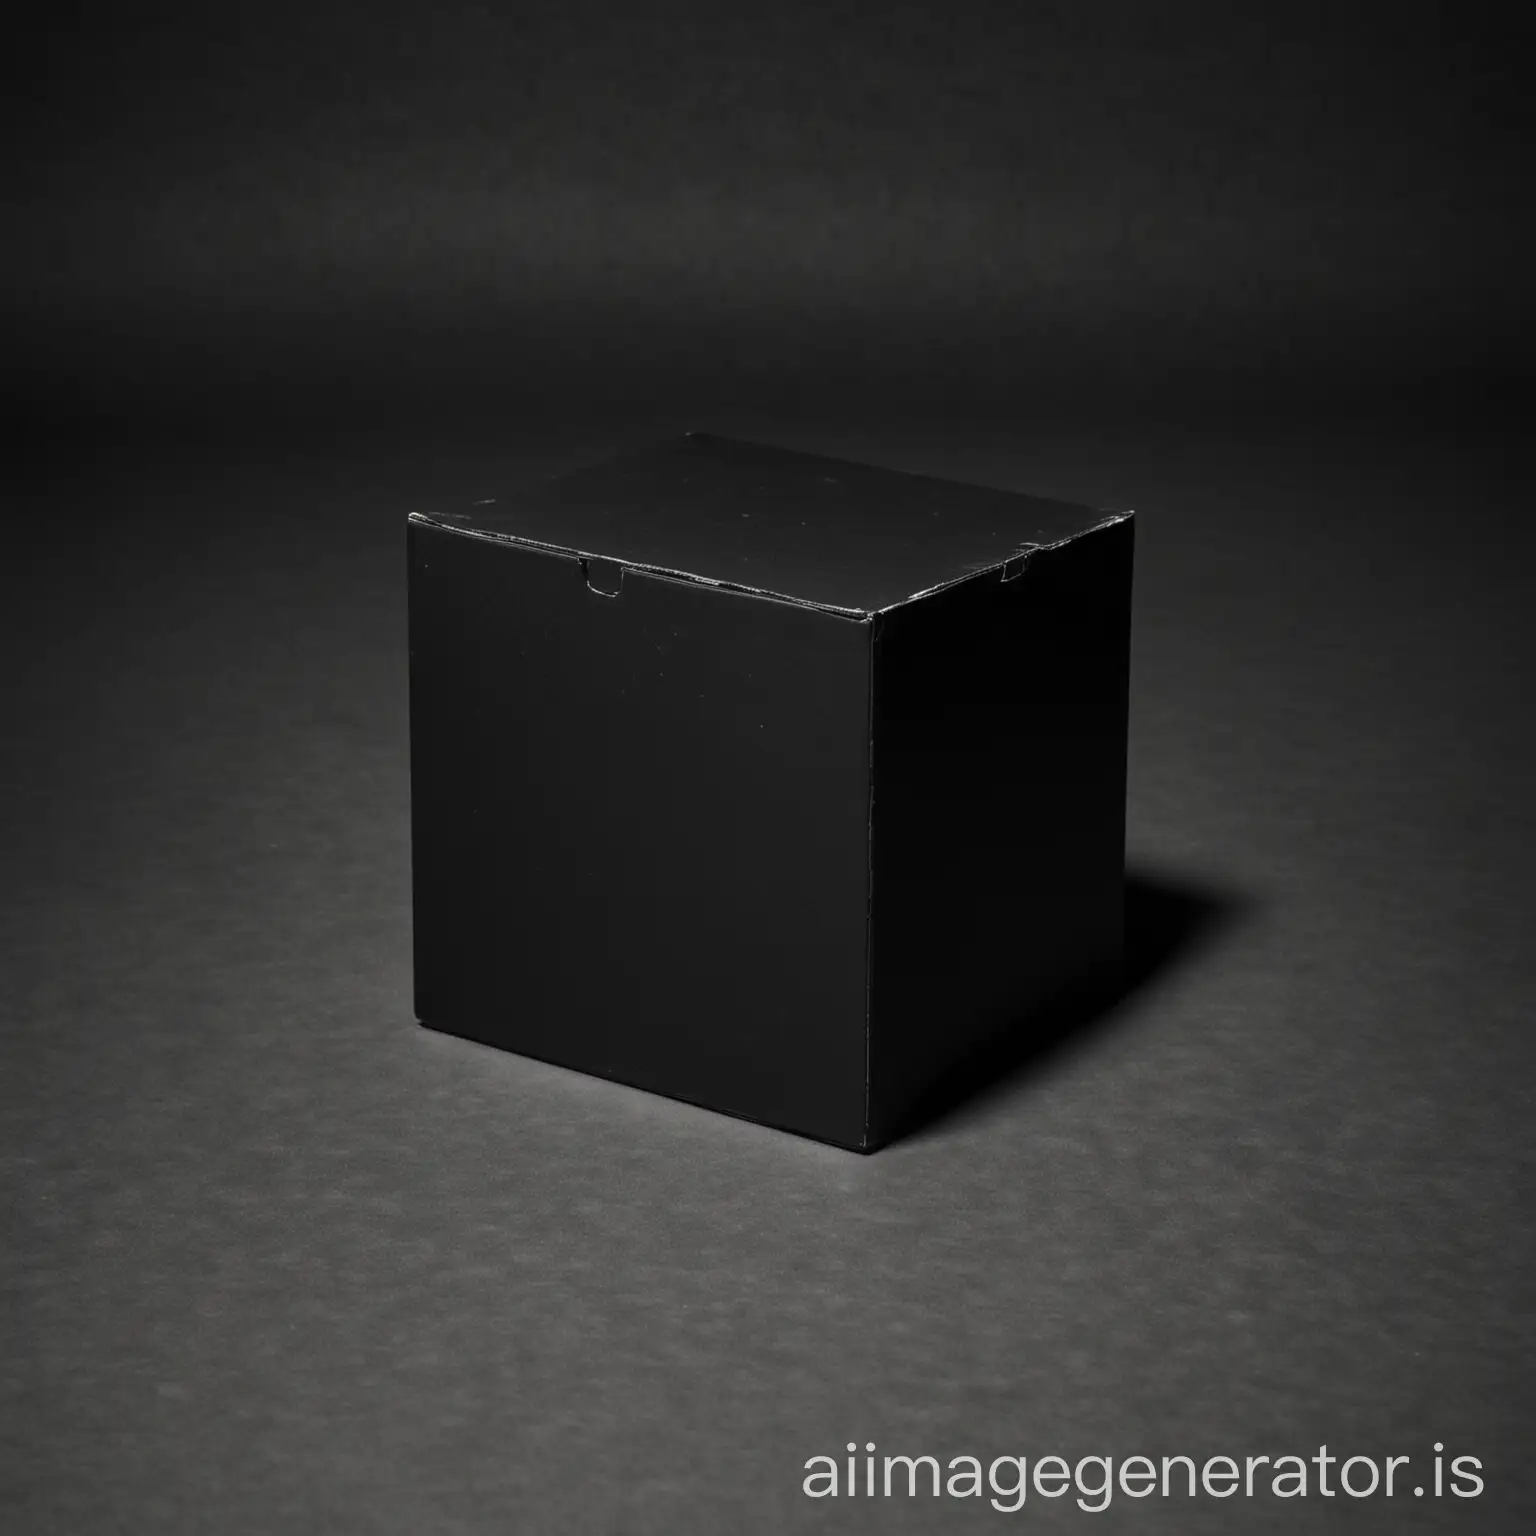 black box in front of image